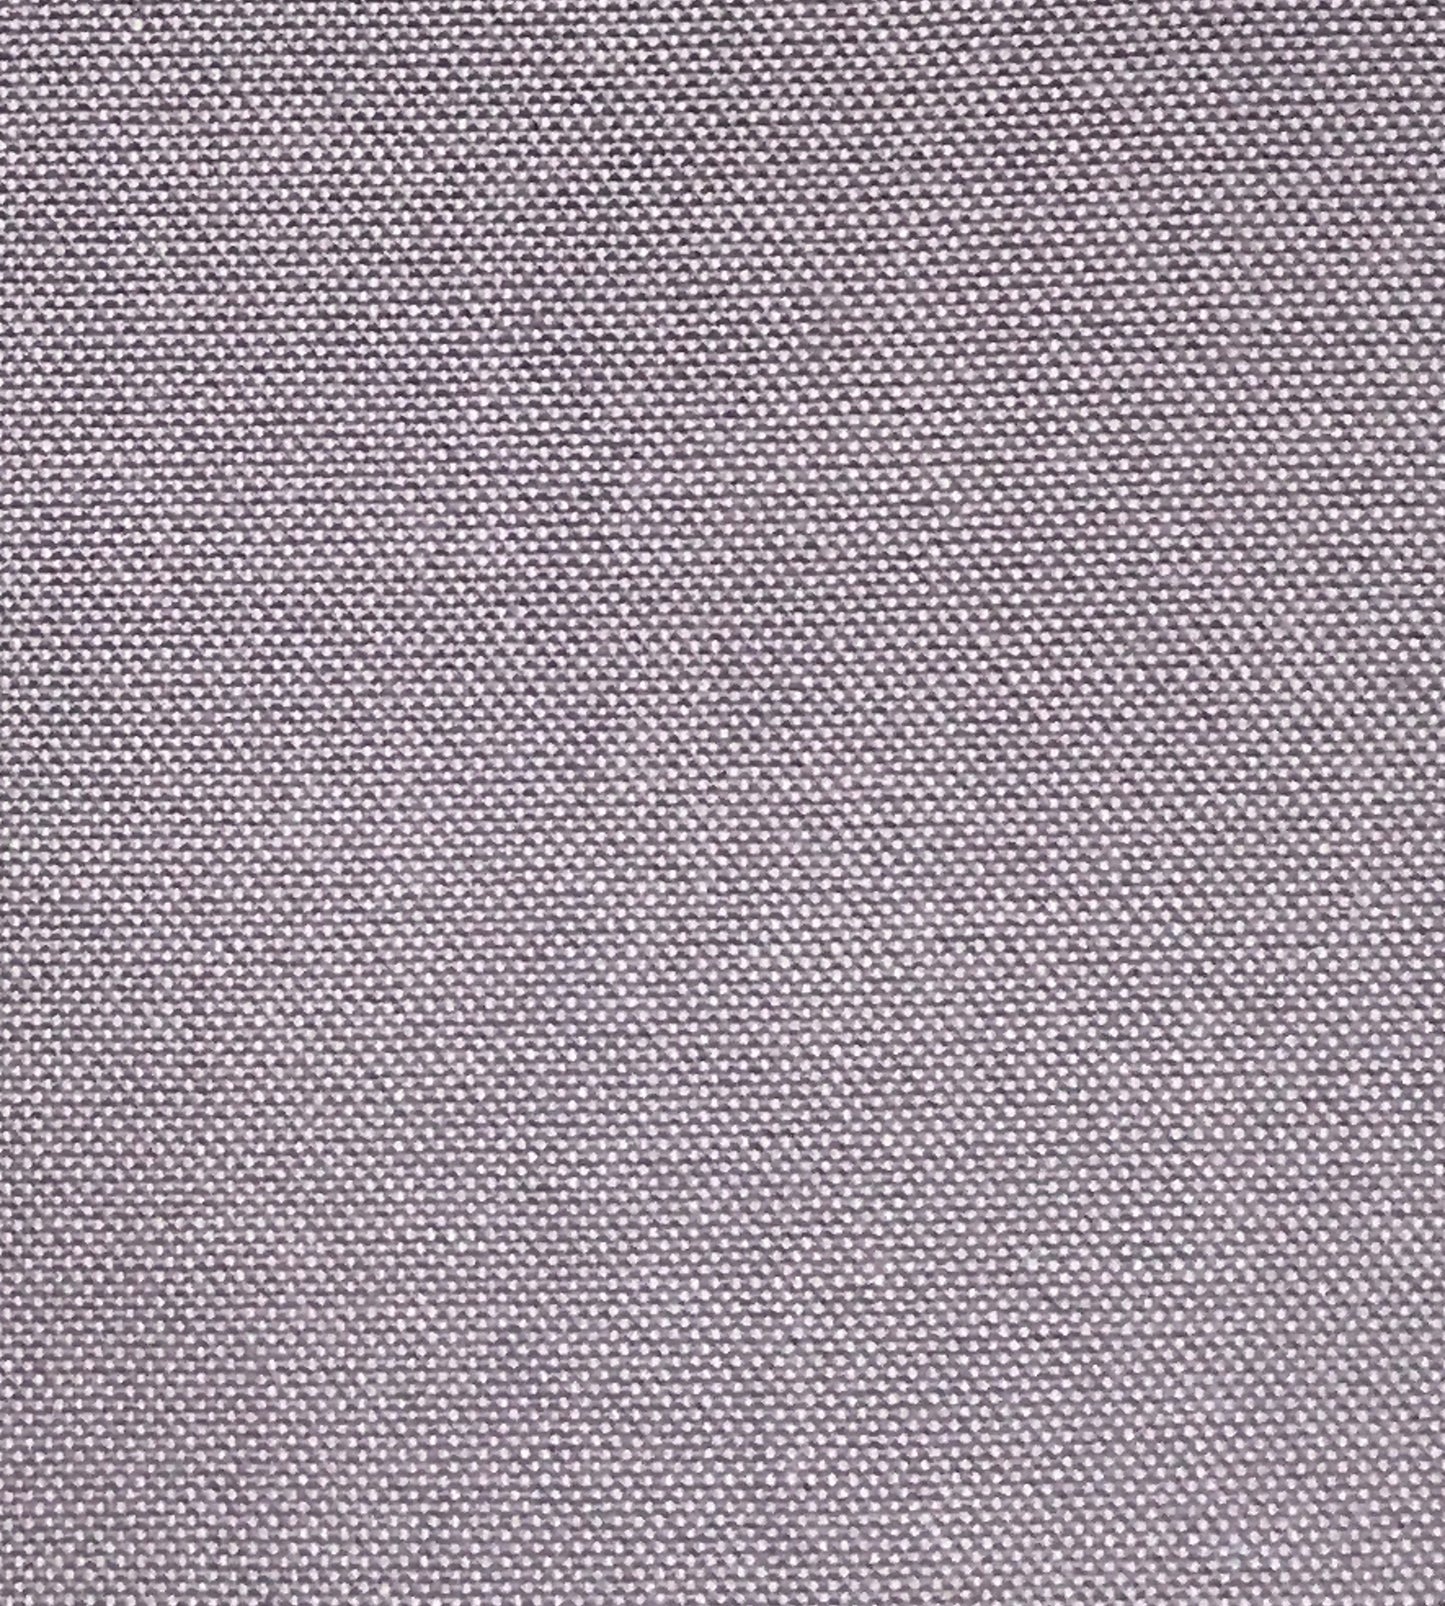 Purchase Old World Weavers Fabric Pattern number F3 00083016, Poker Plain Lavender 1